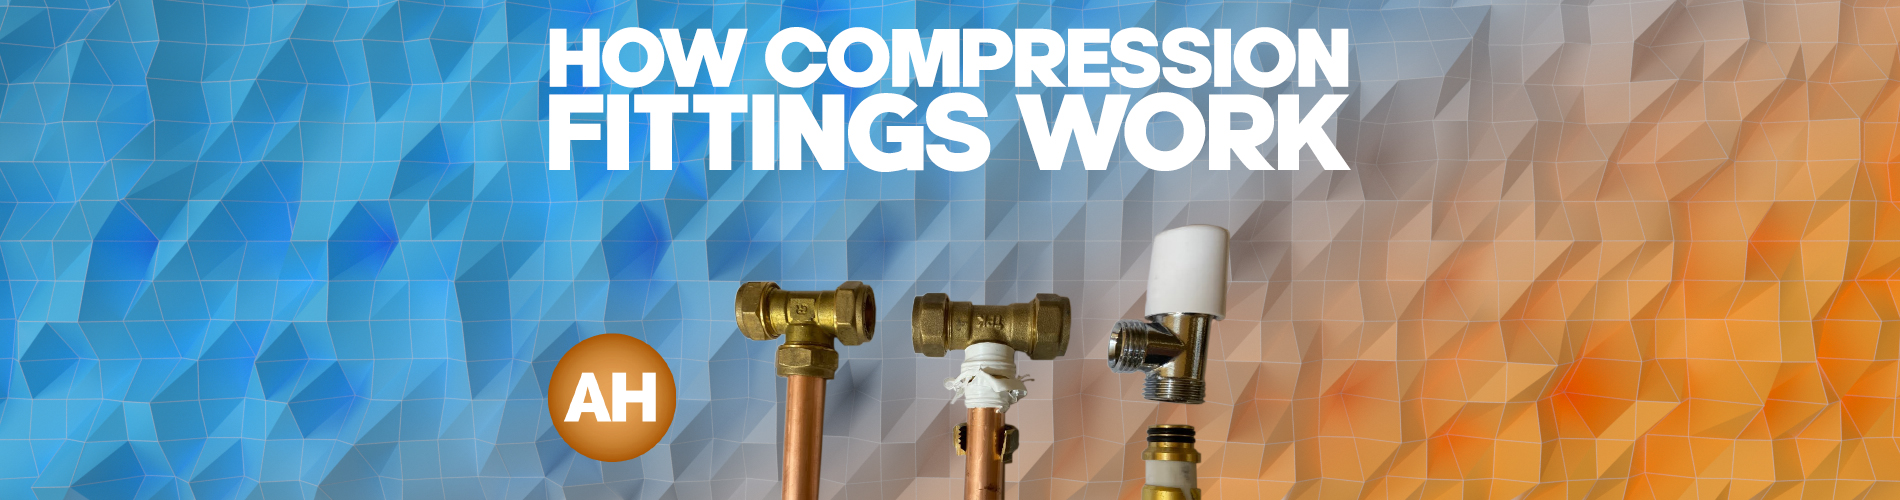 HOW COMPRESSION FITTINGS WORK - Joining Copper Pipes and MLCP Blansol ...